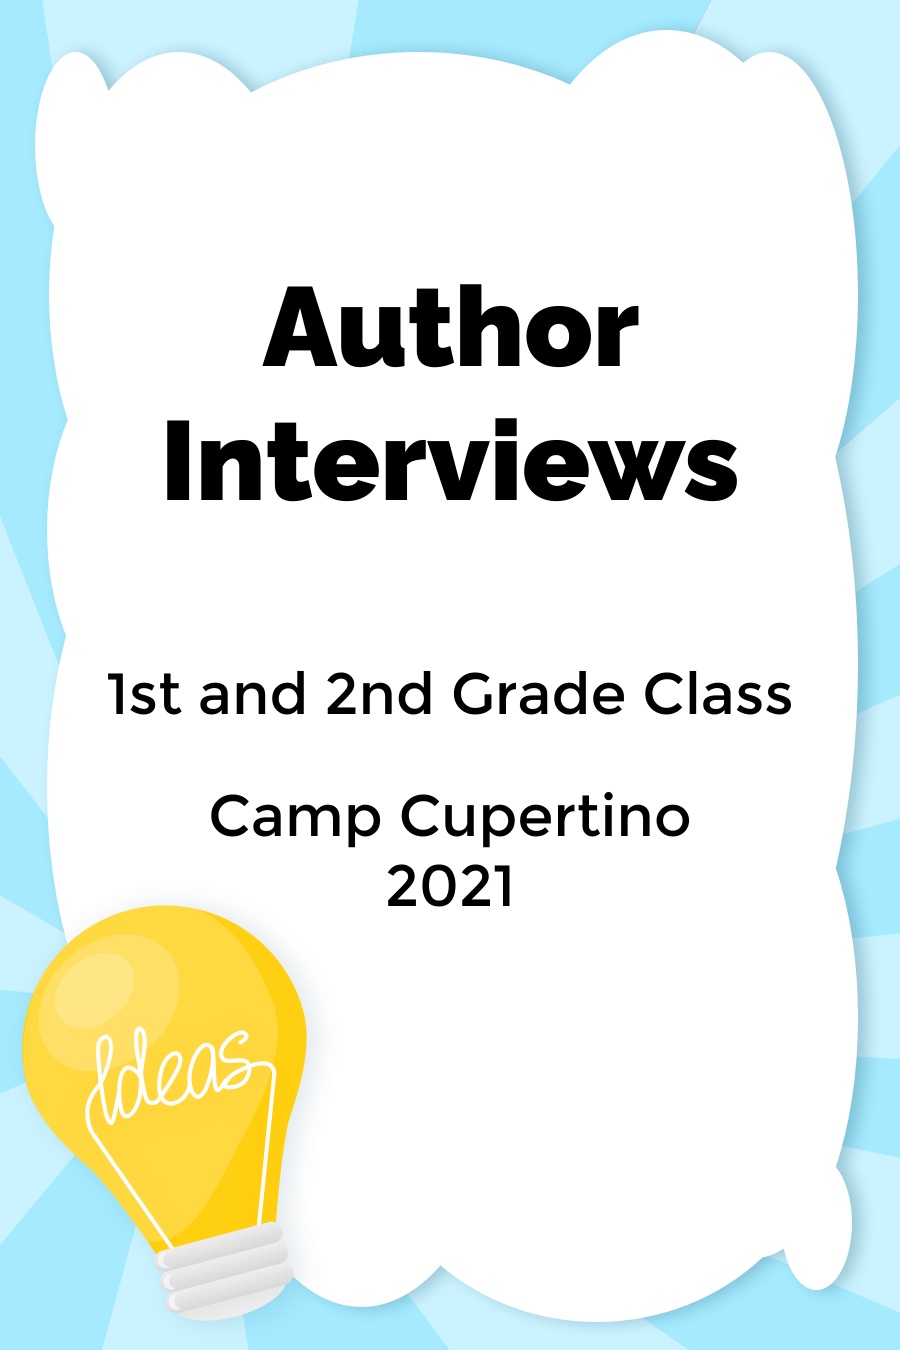 Cupertino Author Interviews 1st and 2nd grade class